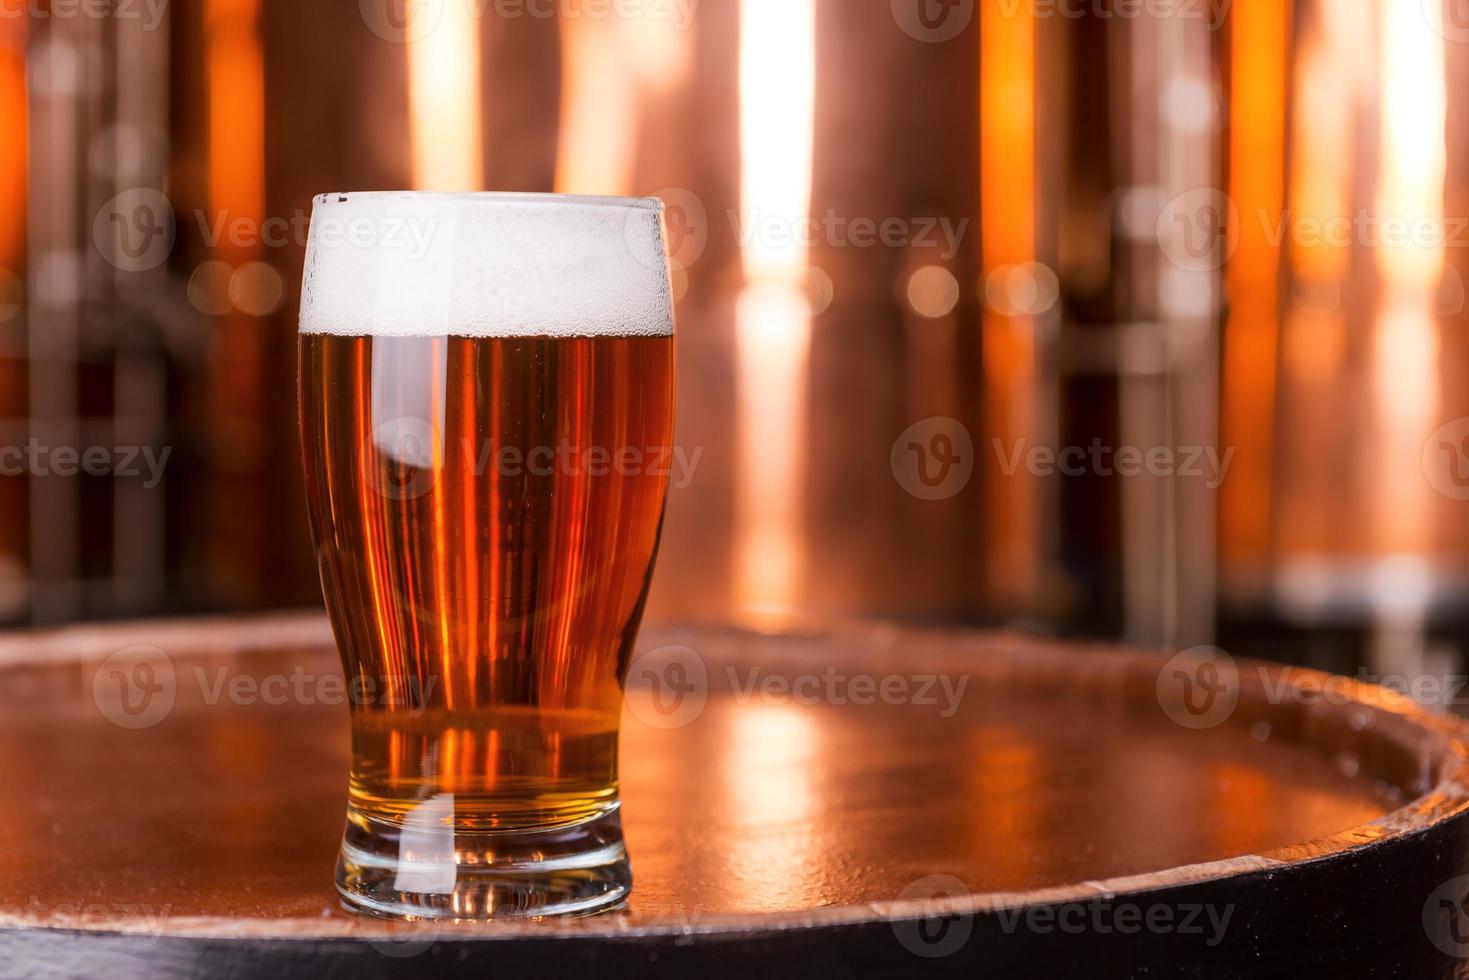 Fresh beer. Close-up of glass with beer standing on the wooden barrel with metal containers in the background photo